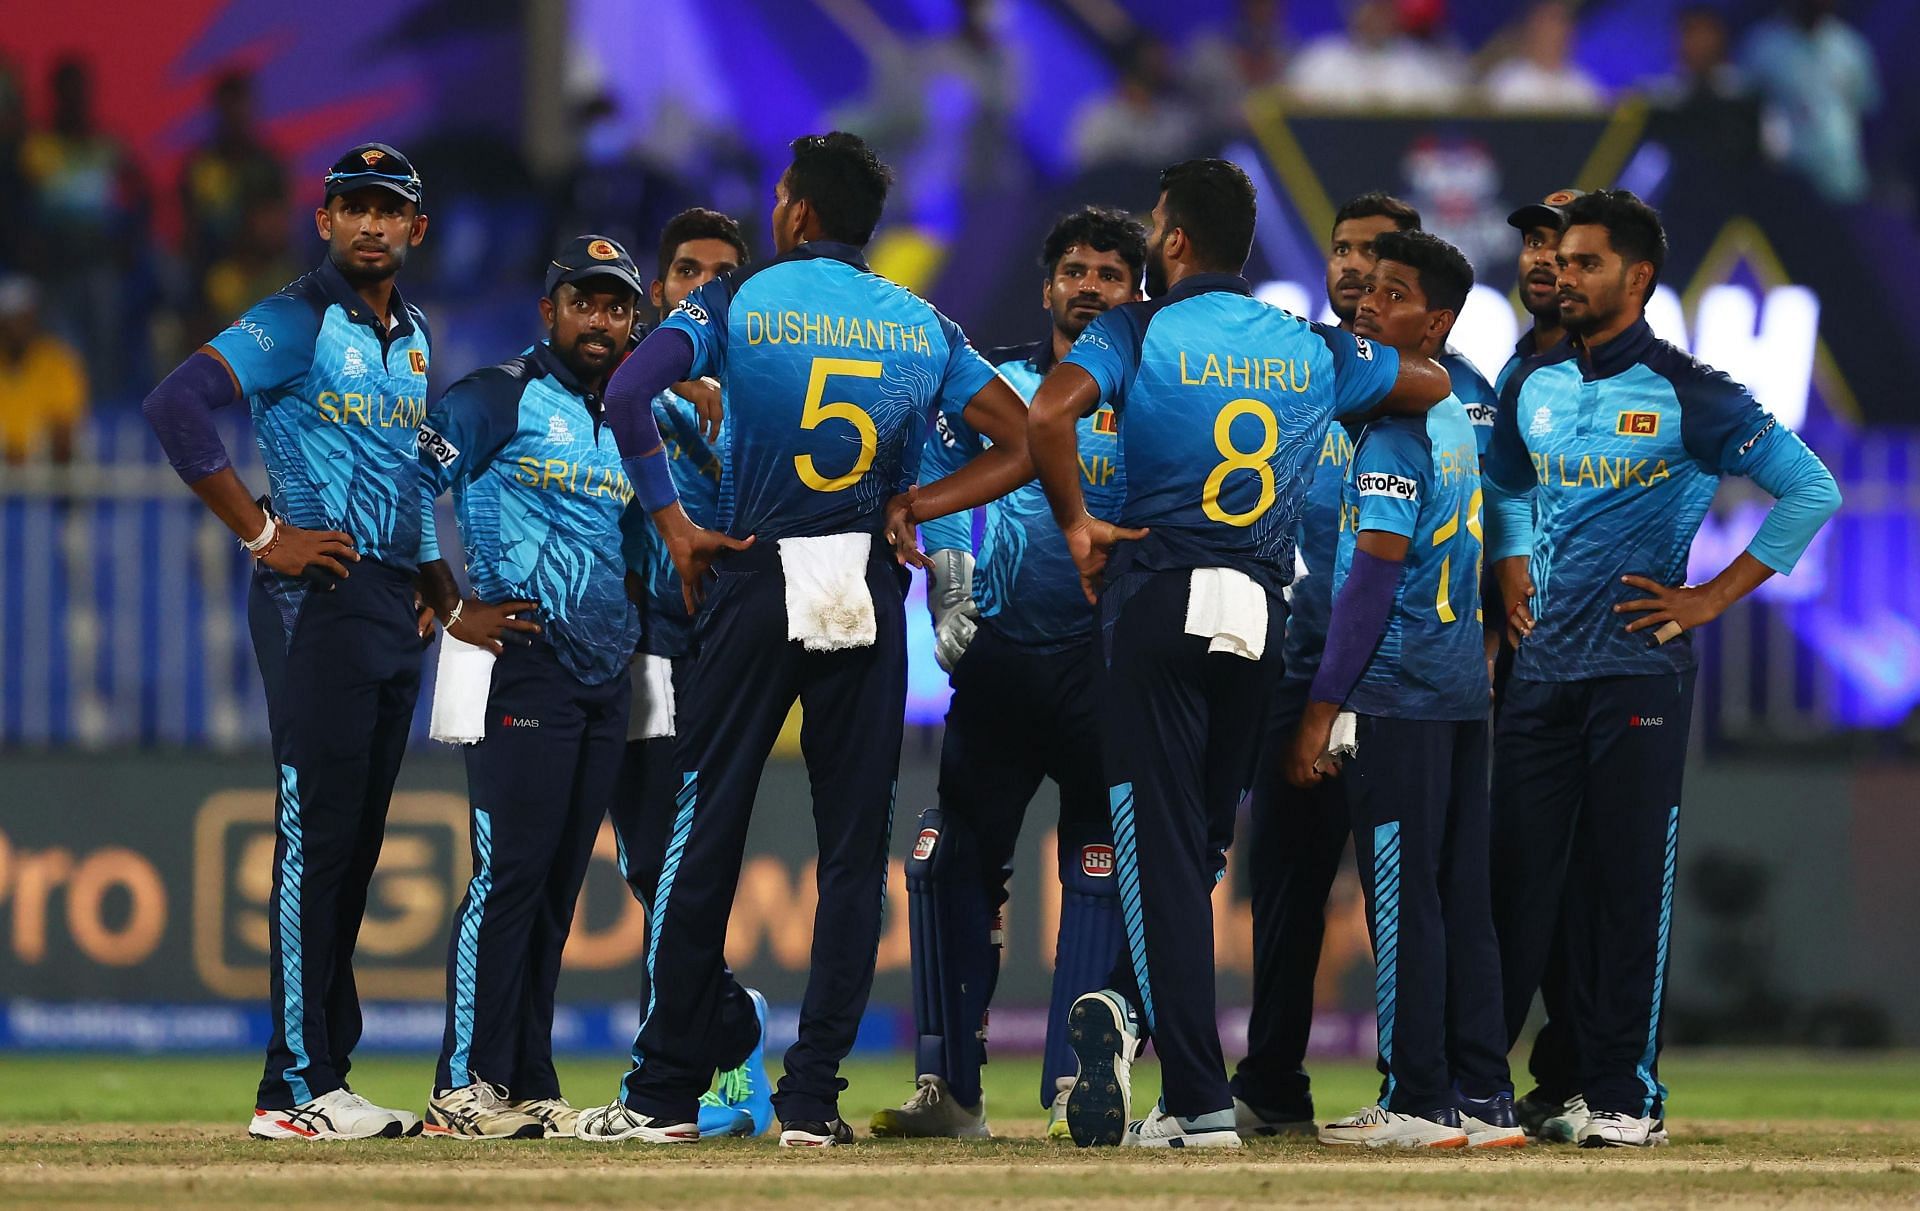 Can Sri Lanka continue their winning streak in ICC T20 World Cup 2021? (Image Source: Twitter/ICC)